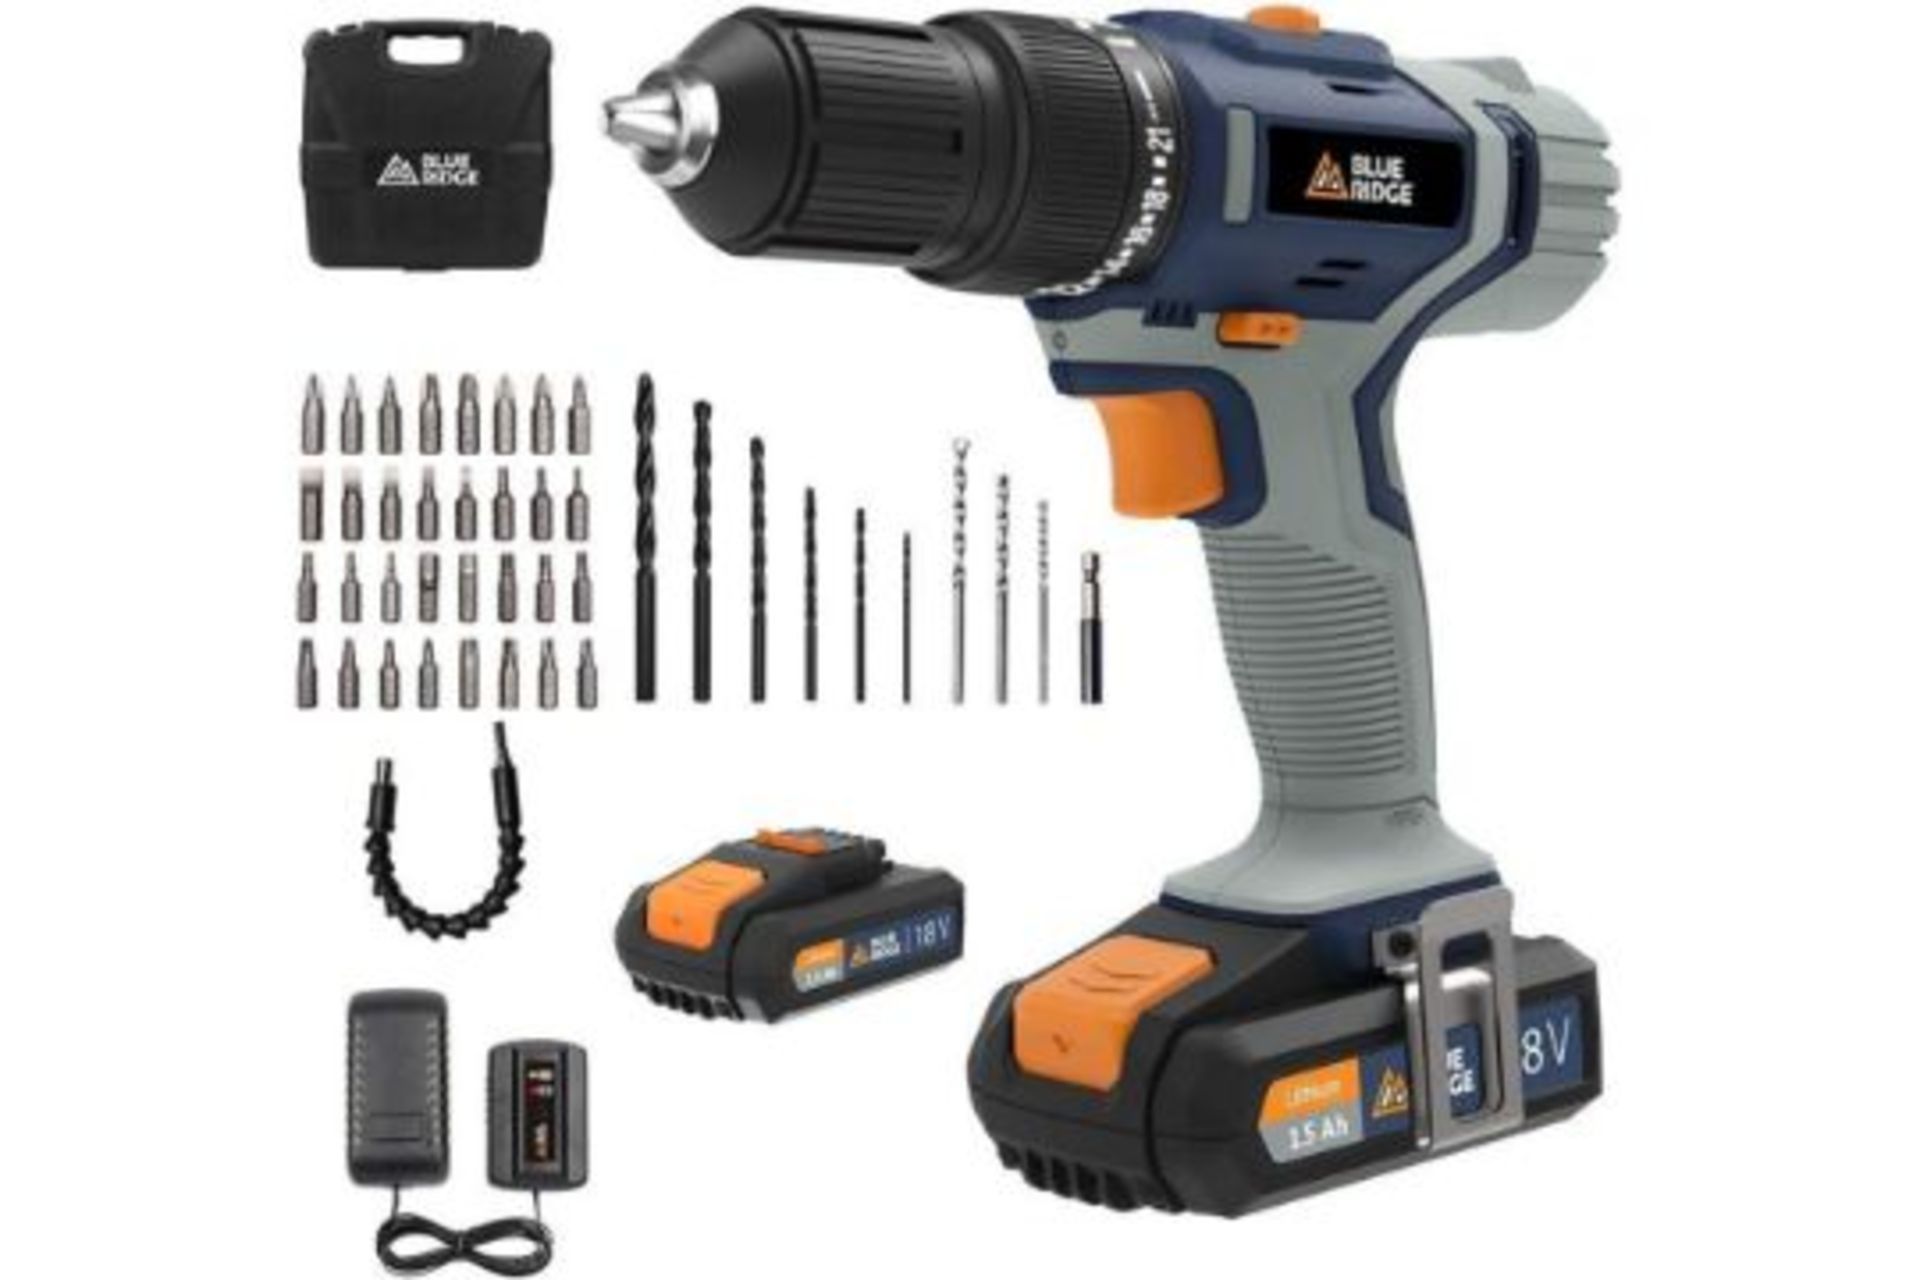 NEW & BOXED BLUE RIDGE 18V Cordless Hammer Drill with 2 x 1.5 Ah Li-ion Batteries & 43 Piece - Image 3 of 3